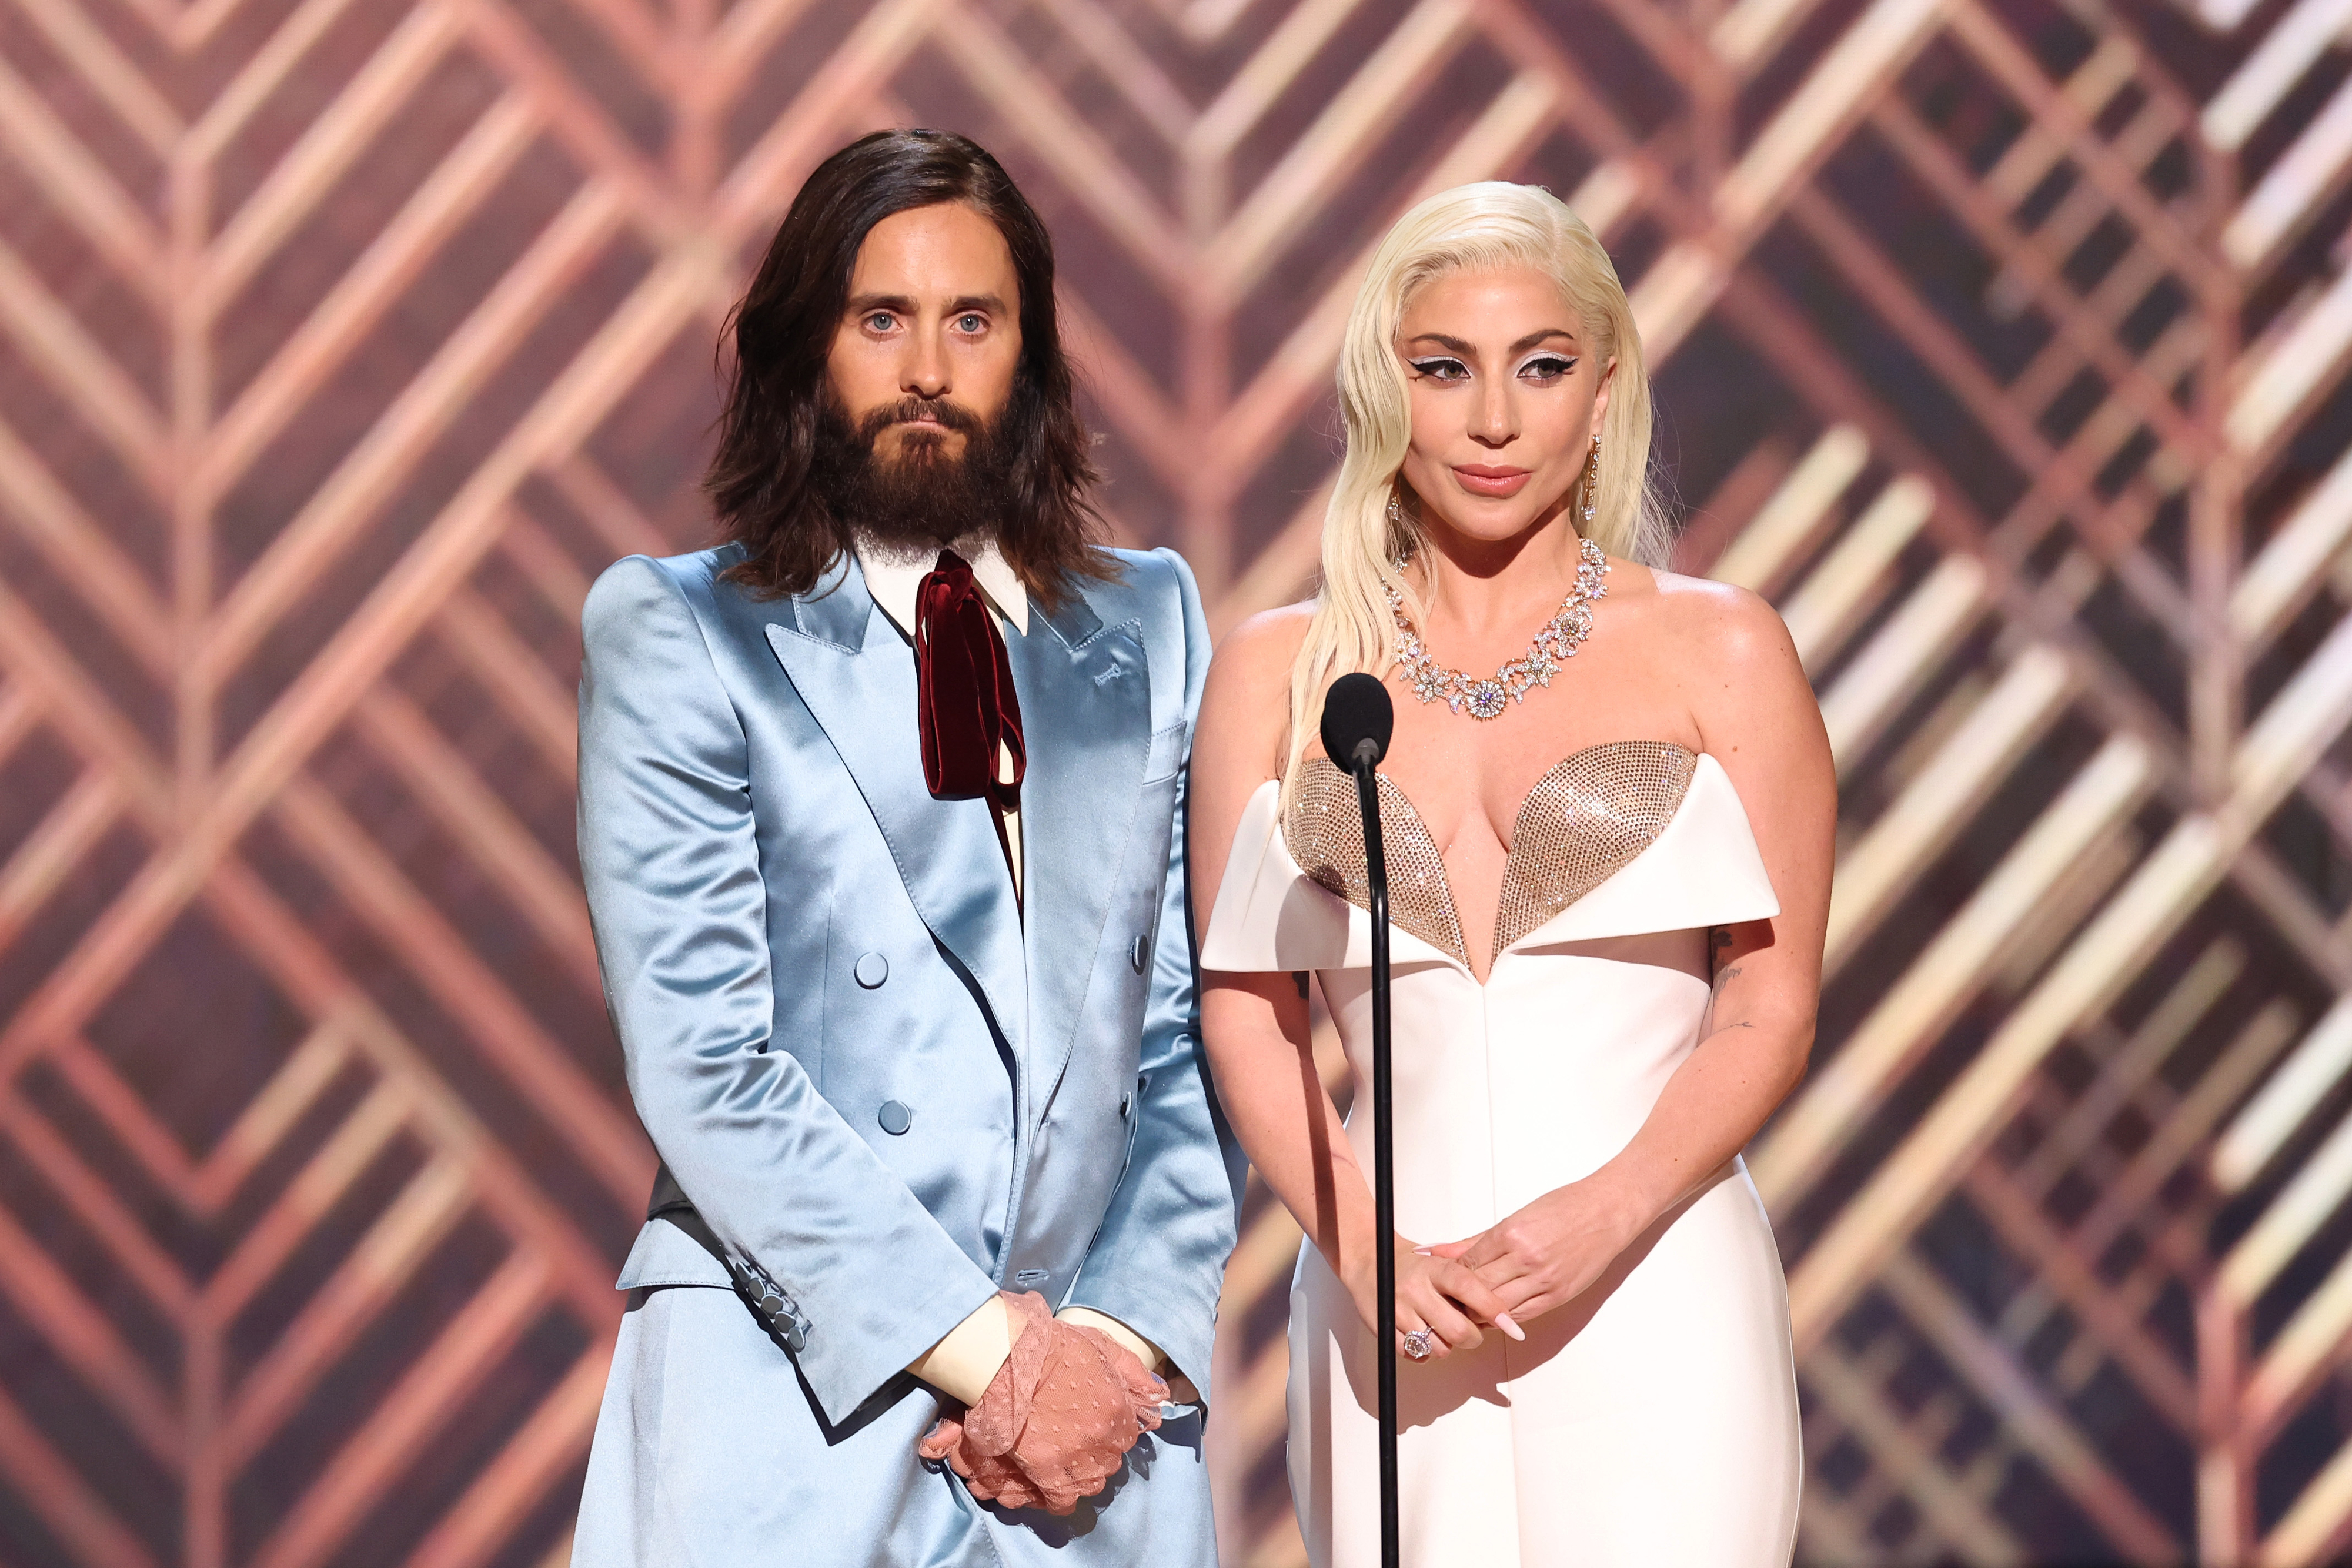 Jared Leto and Lady Gaga presenting an award onstage